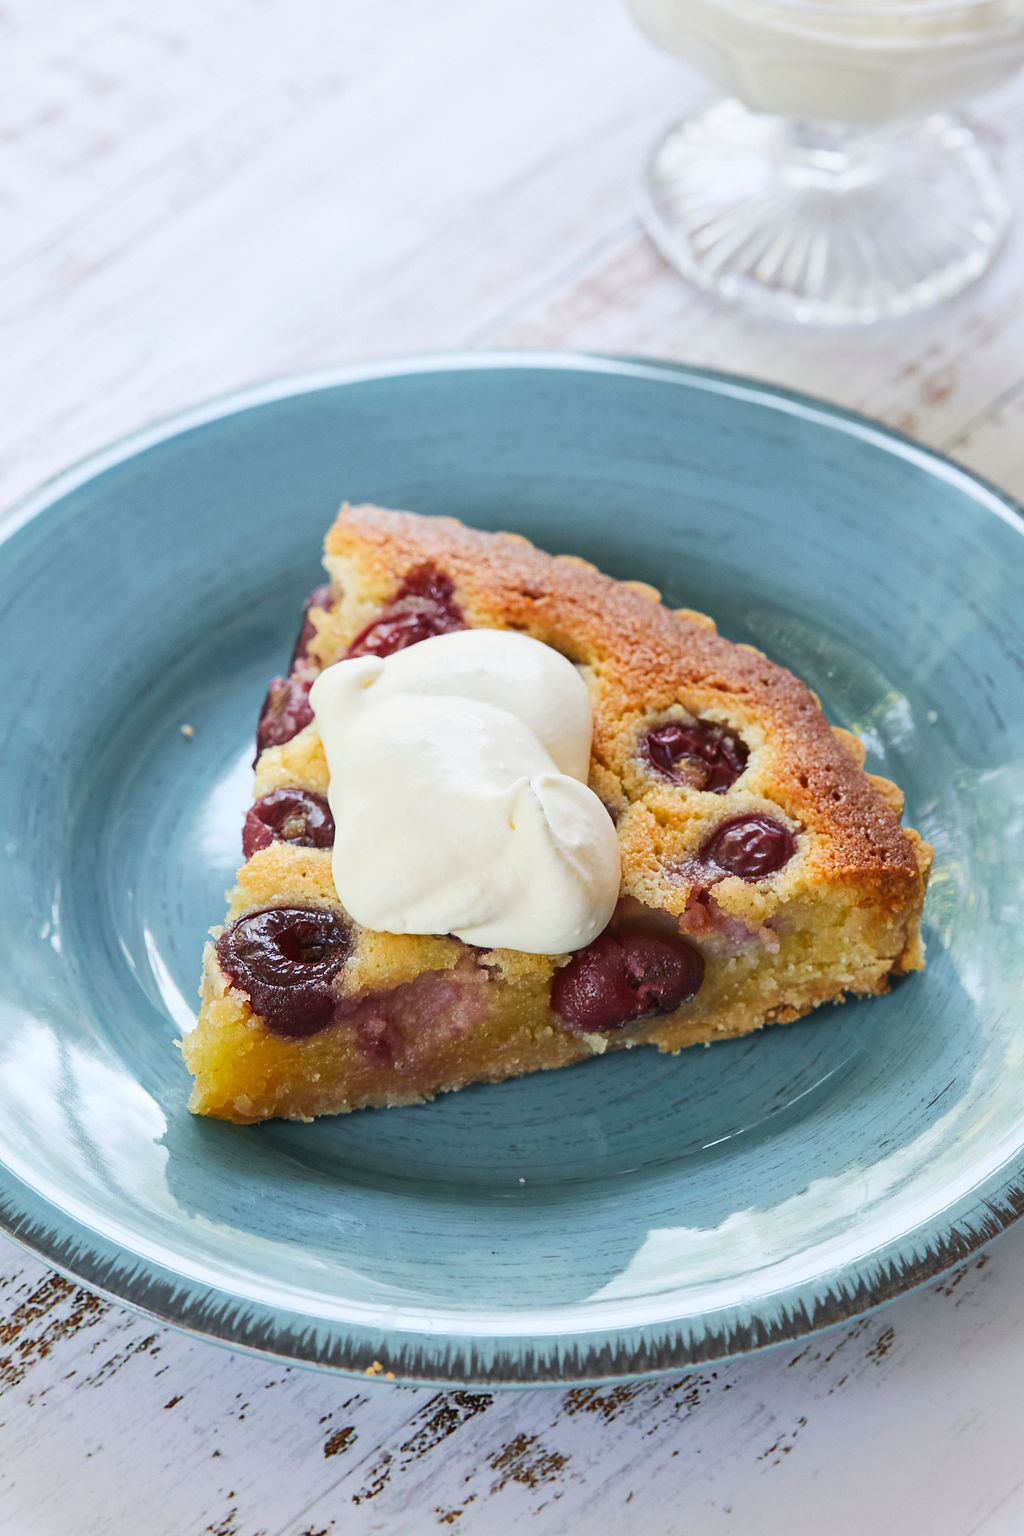 A slice of my cherry almond tart topped with fresh cream.